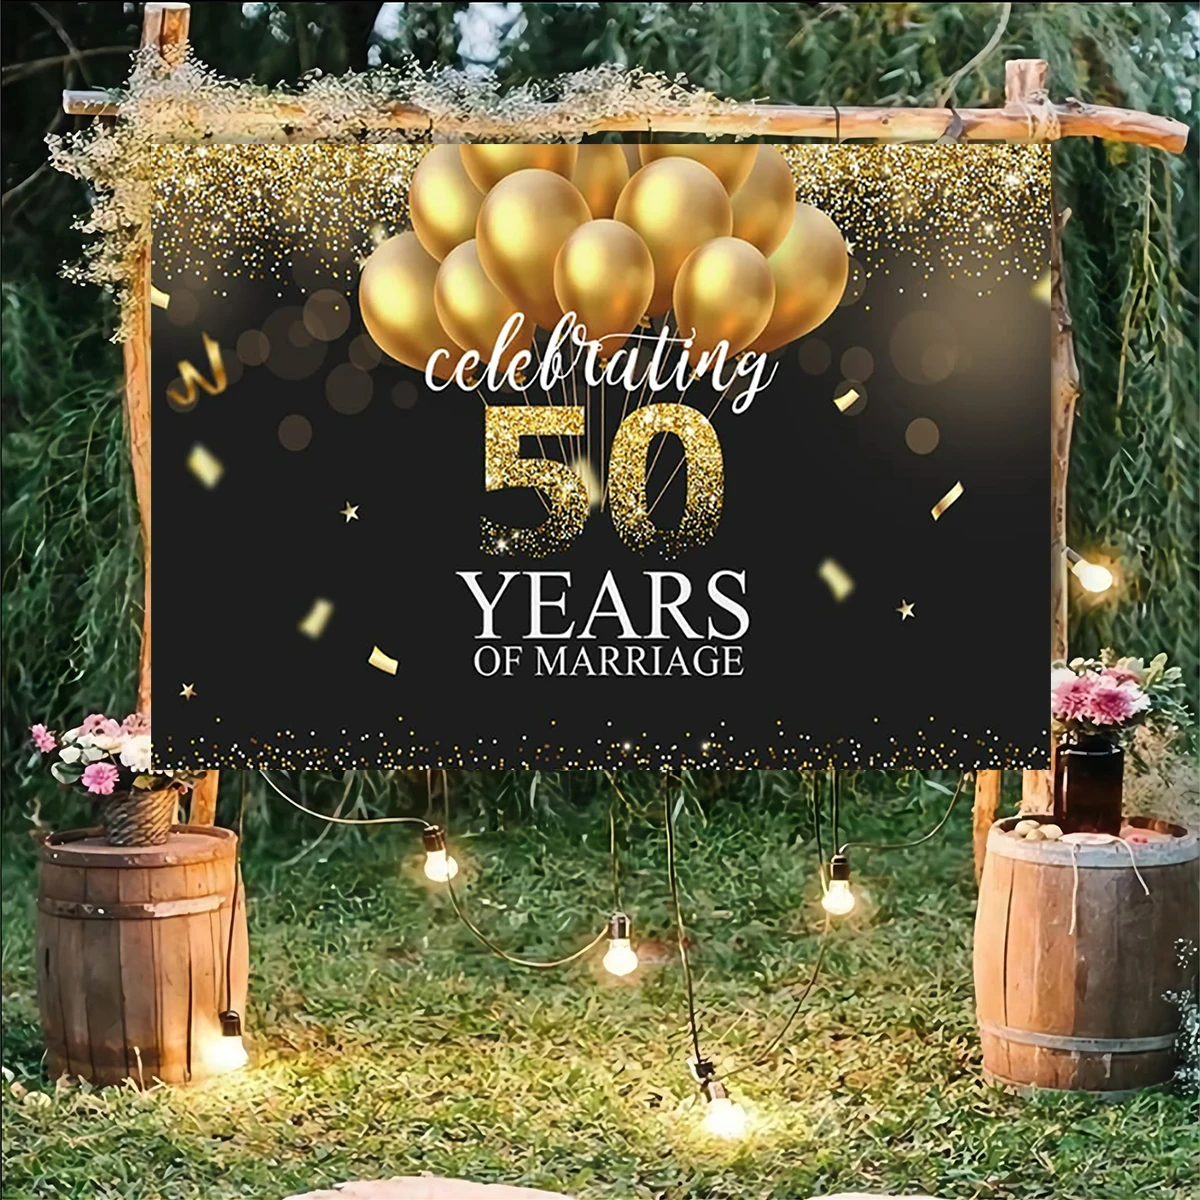 

Happy 50th Birthday Party Anniversary Decorations Backdrop Golden Balloons Photo Background Cake Table Extra Large Banner